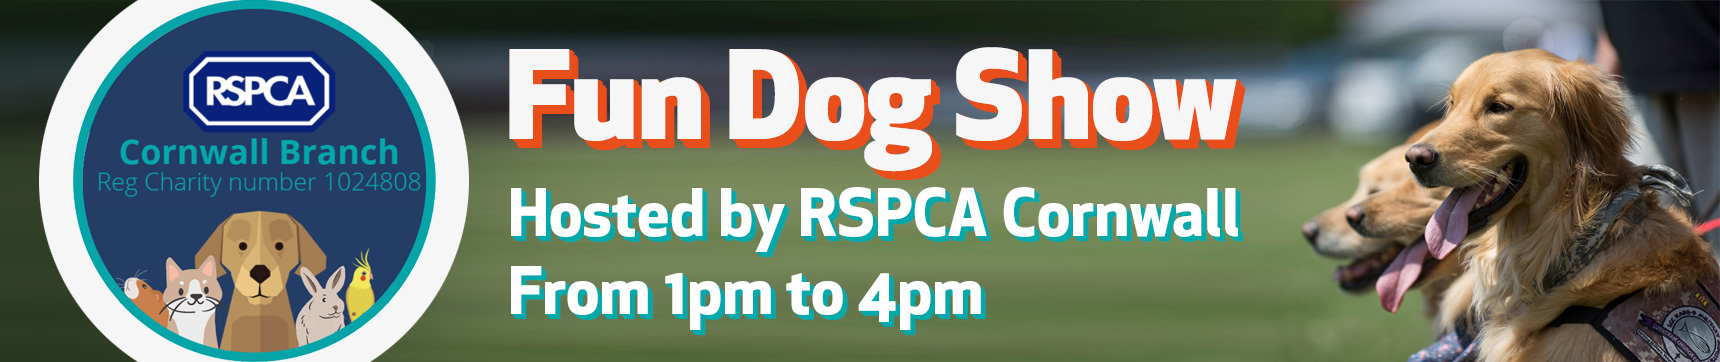 Fun Dog Show hosted by RSPCA Cornwall 1pm-4pm